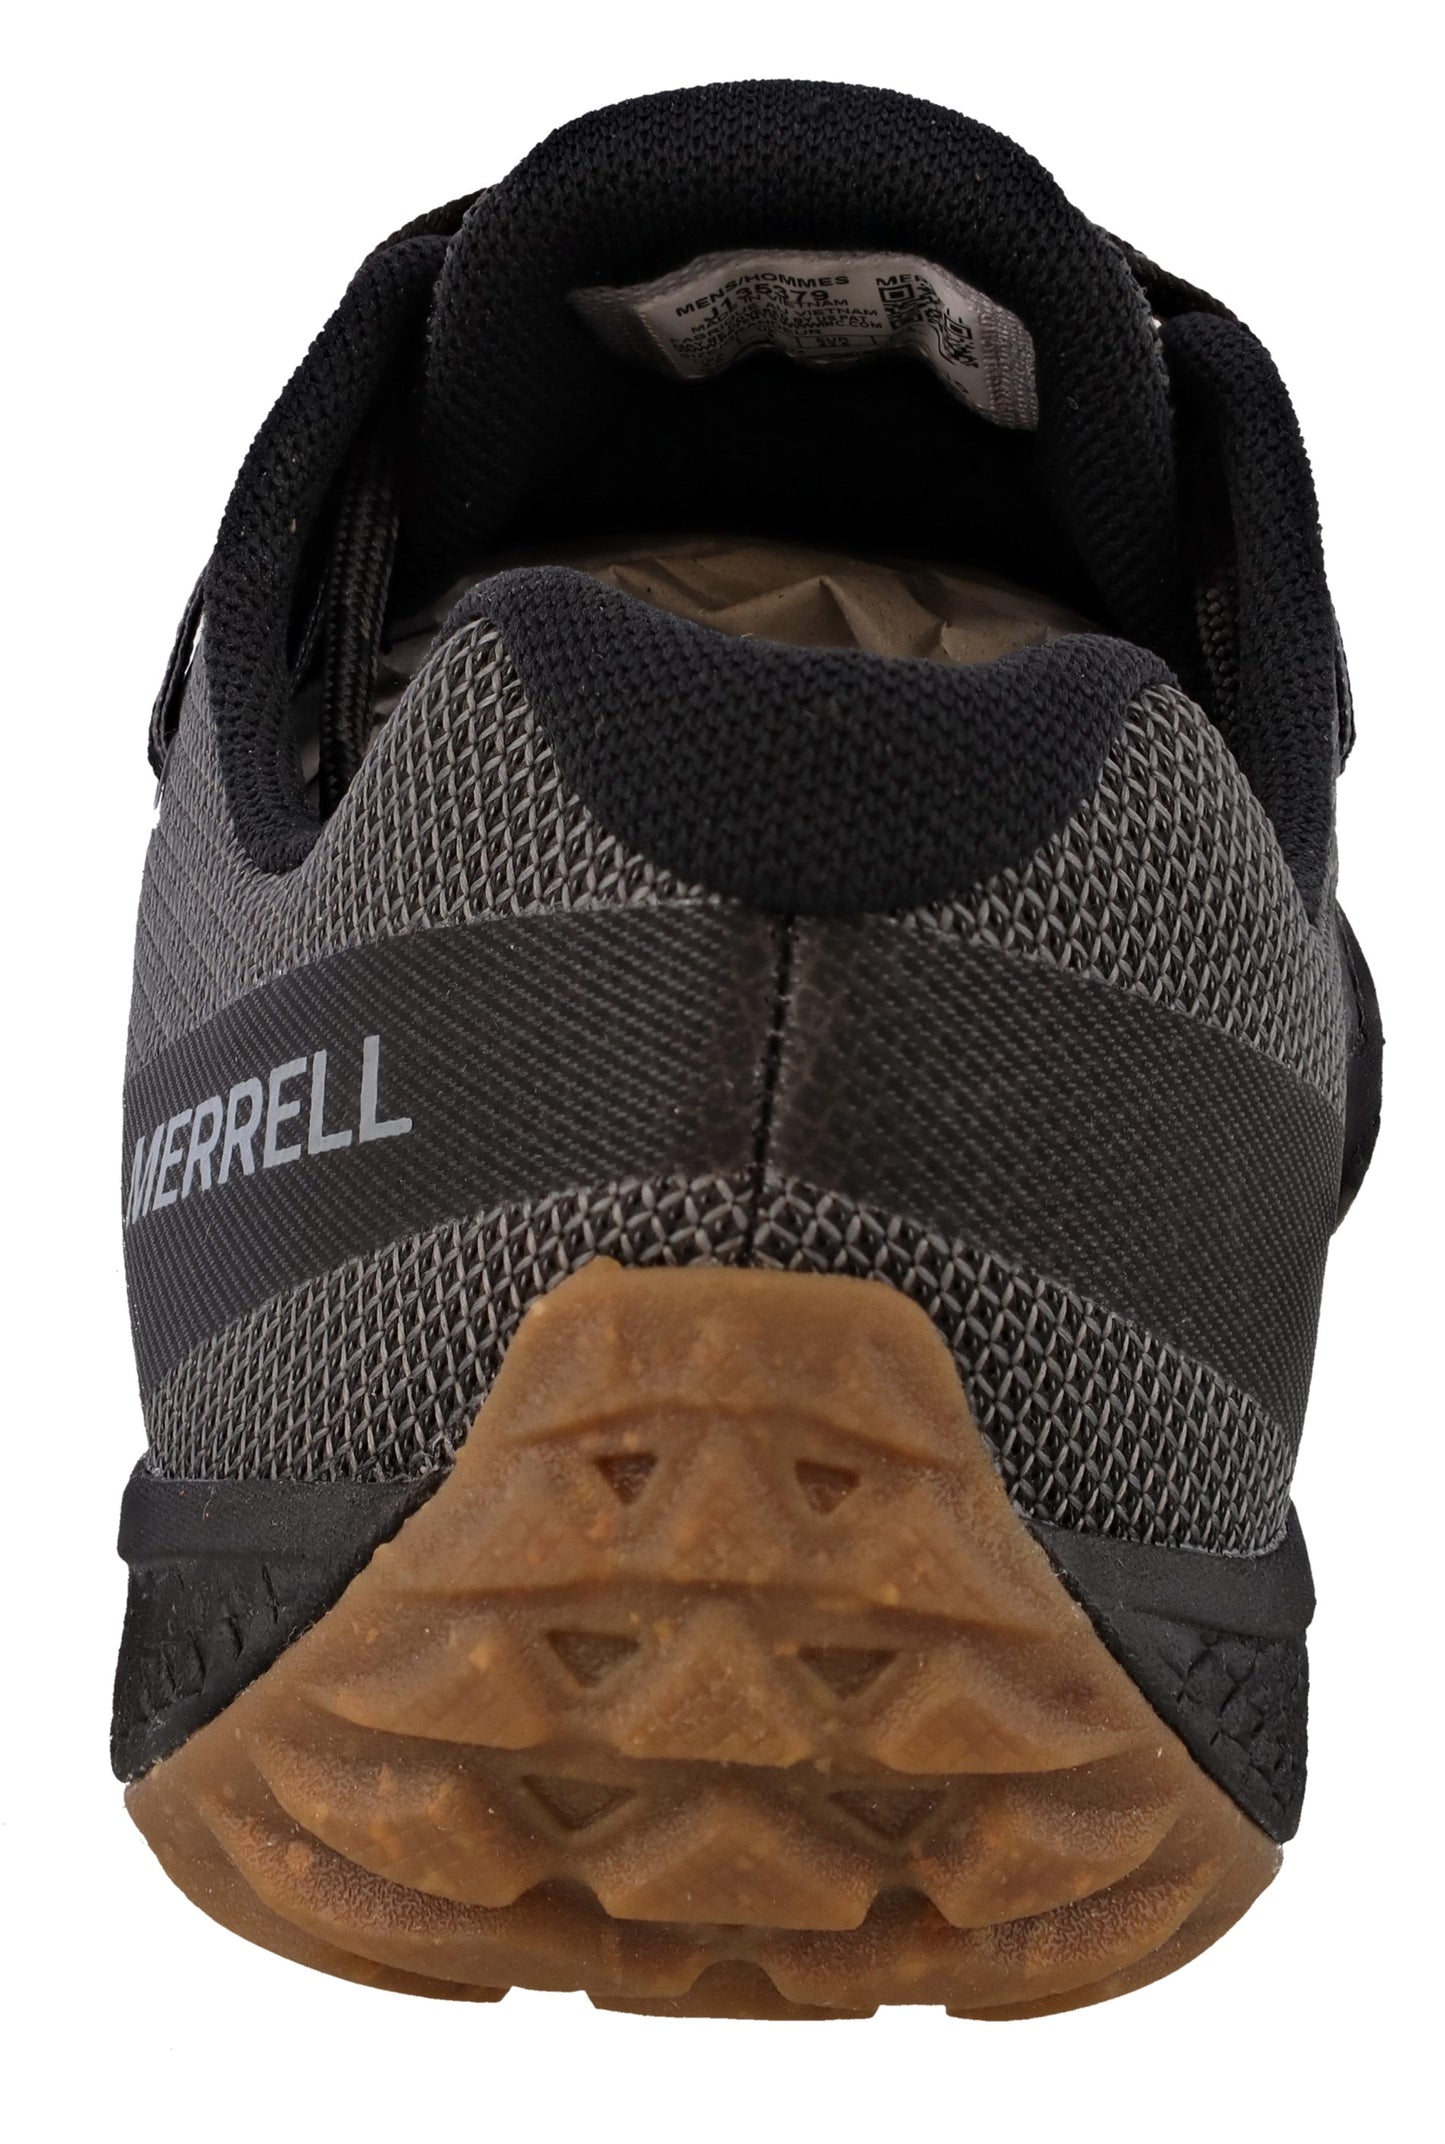 MERRELL Trail Glove 6 Barefoot Shoes Men’s Size 12 - INCENSE J067167 